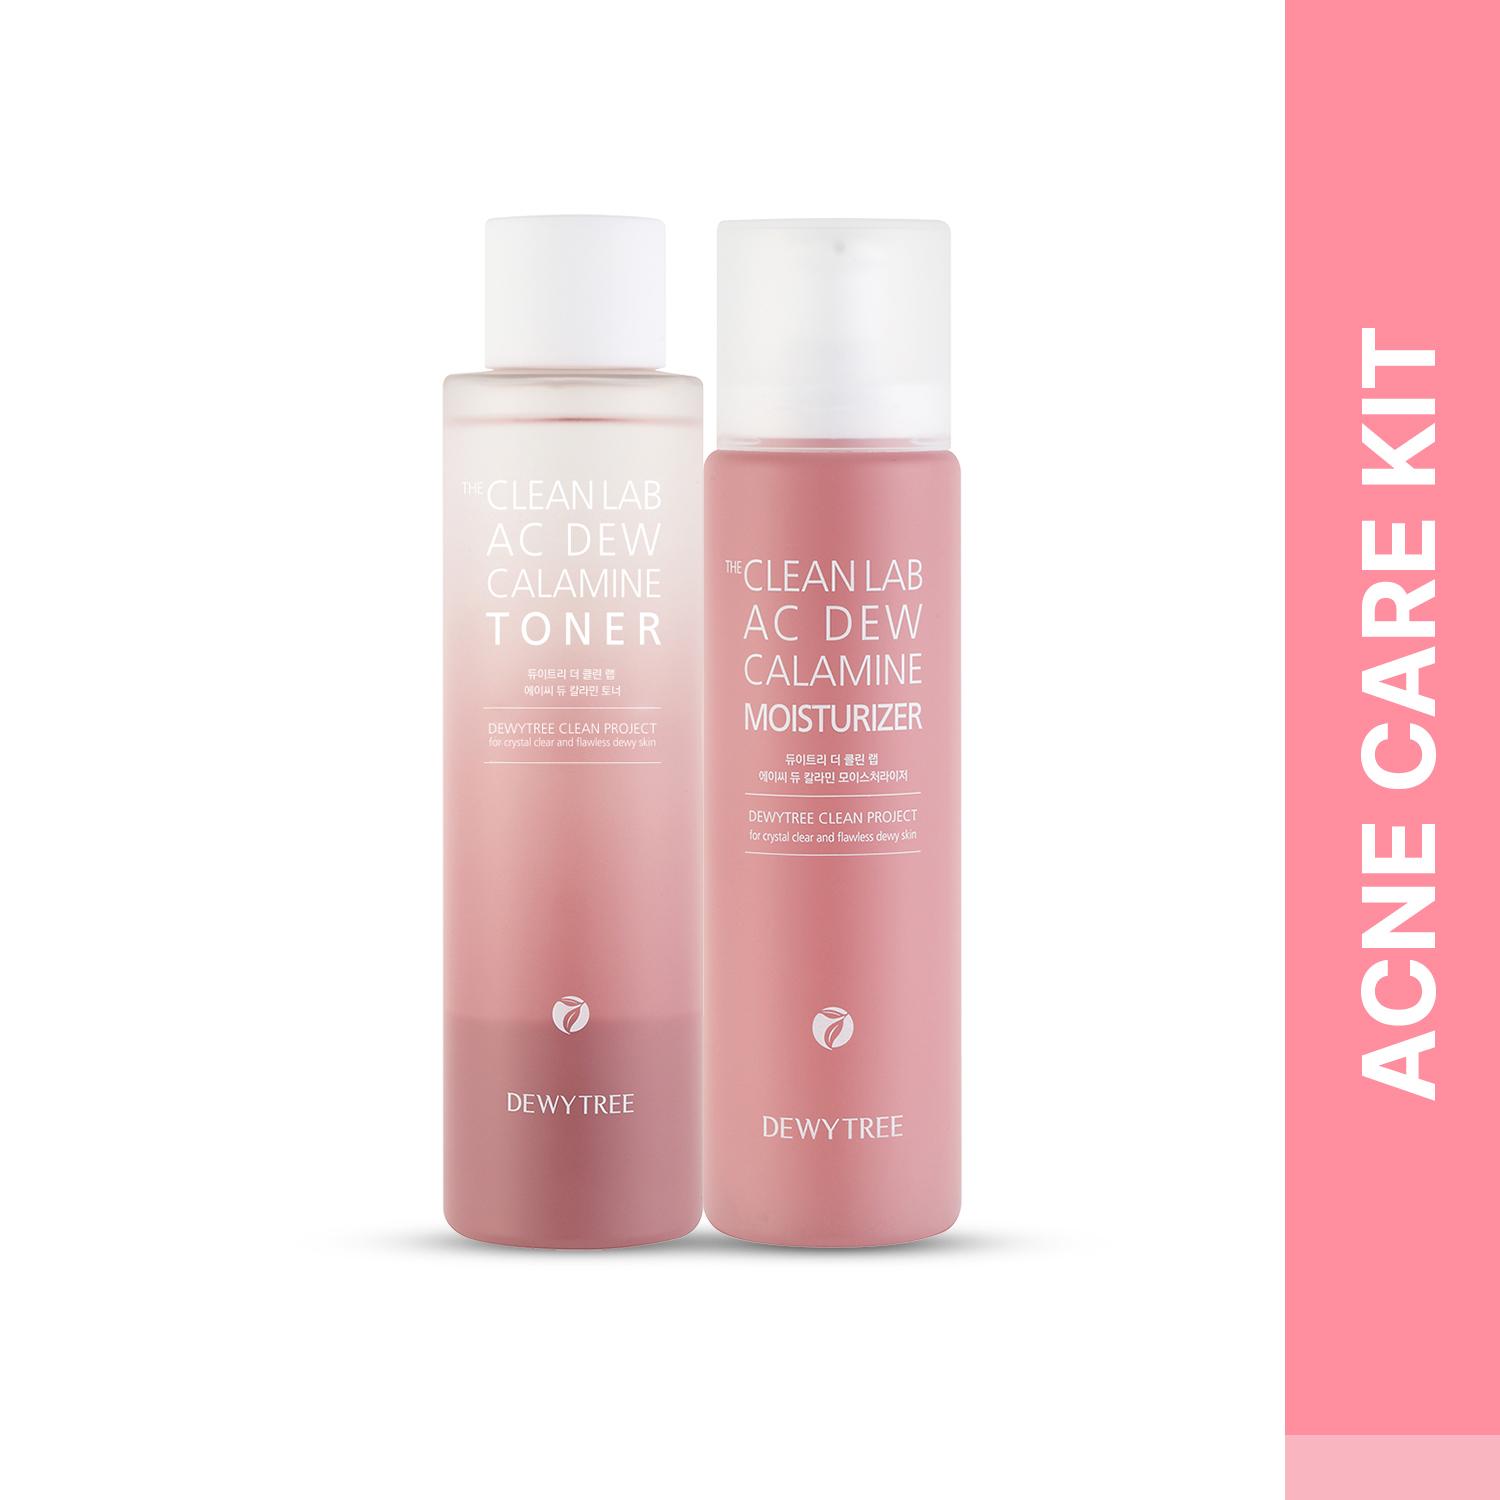 Dewytree | Dewytree The Clean Lab Ac Dew Calamine Toner (200 ml) And Moisturizer (120ml) Combo